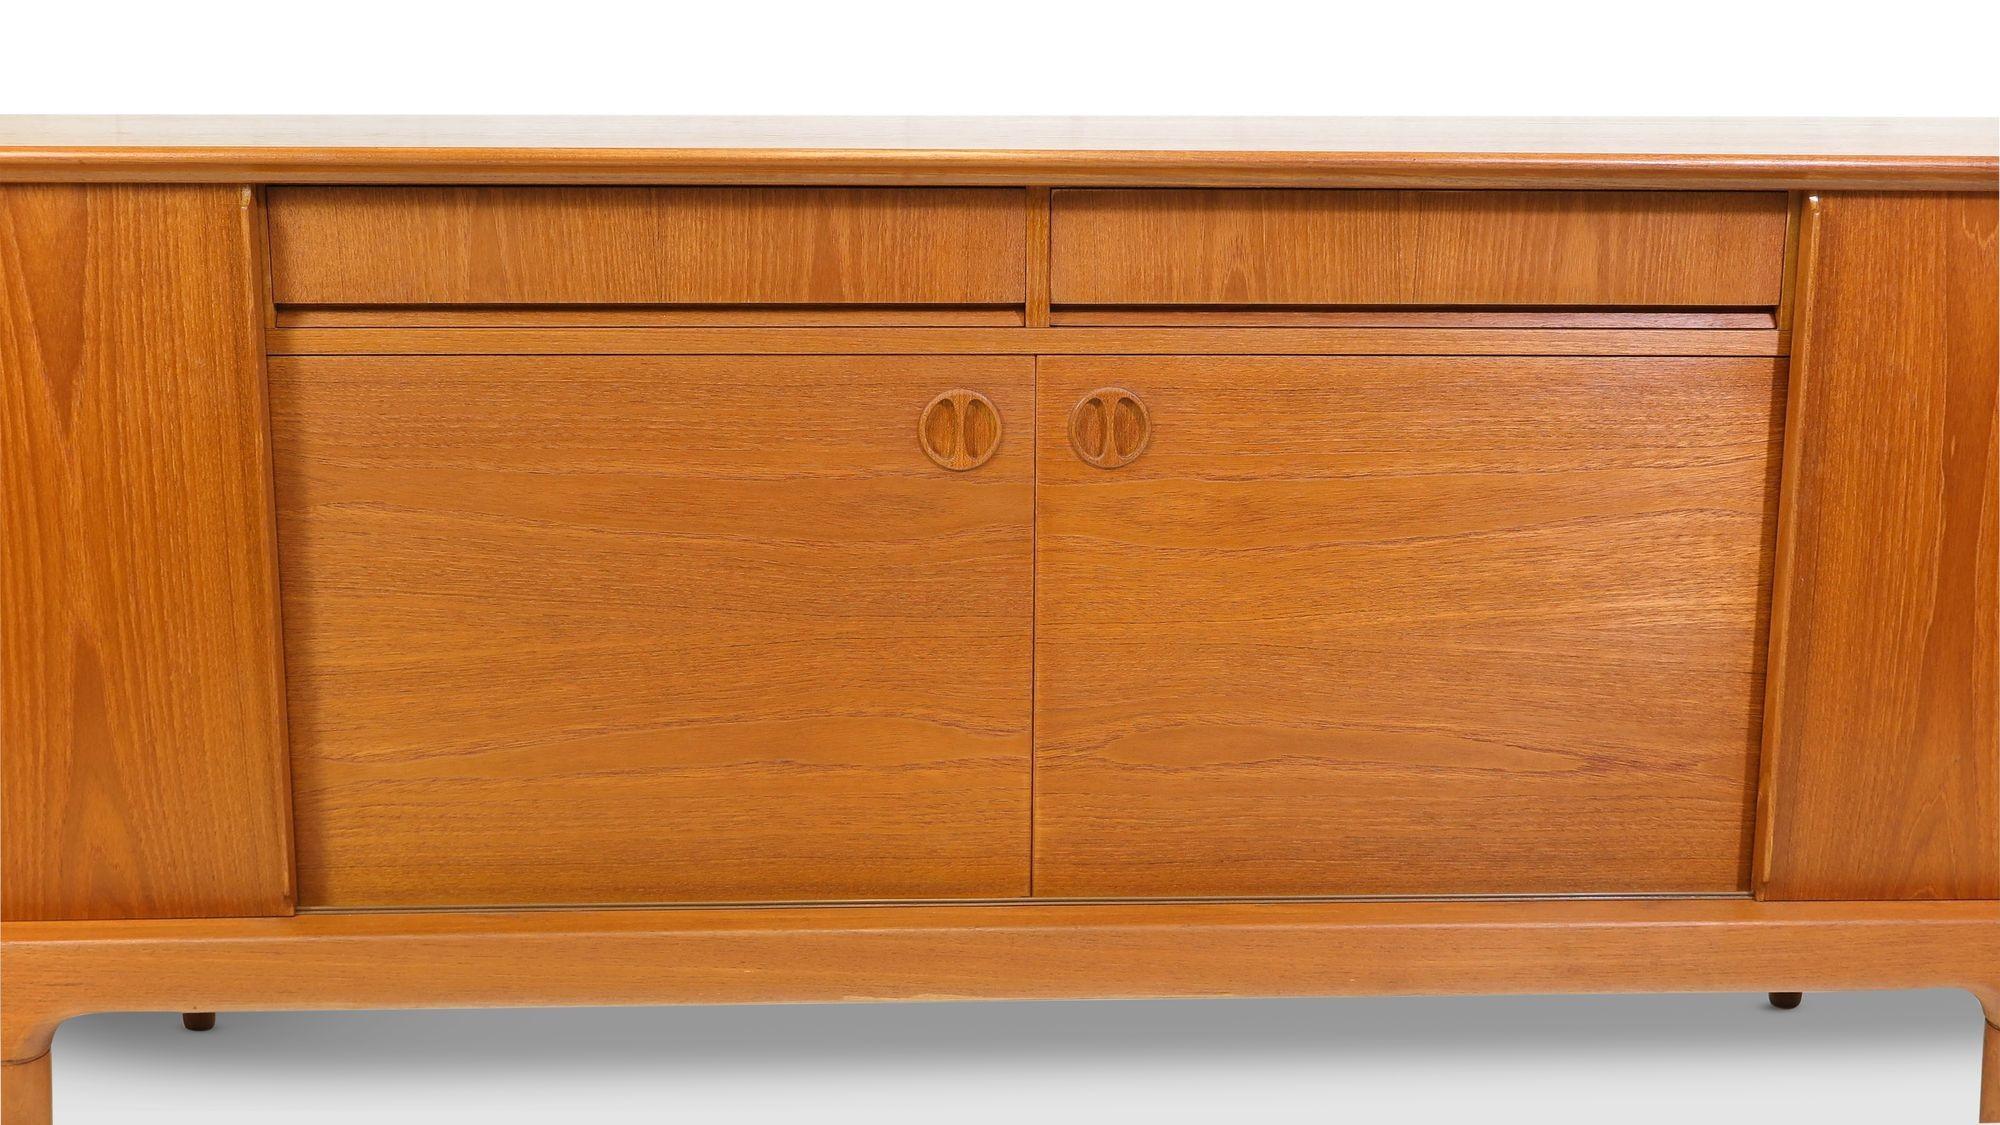 Mid-century teak credenza designed by Johansen Andersen for Clausen Sons, Denmark, 1960s. The sideboard is handcrafted of book-matched old-growth teak with four sliding cabinet doors and two drawers with sculptural pulls. The doors open to reveal an